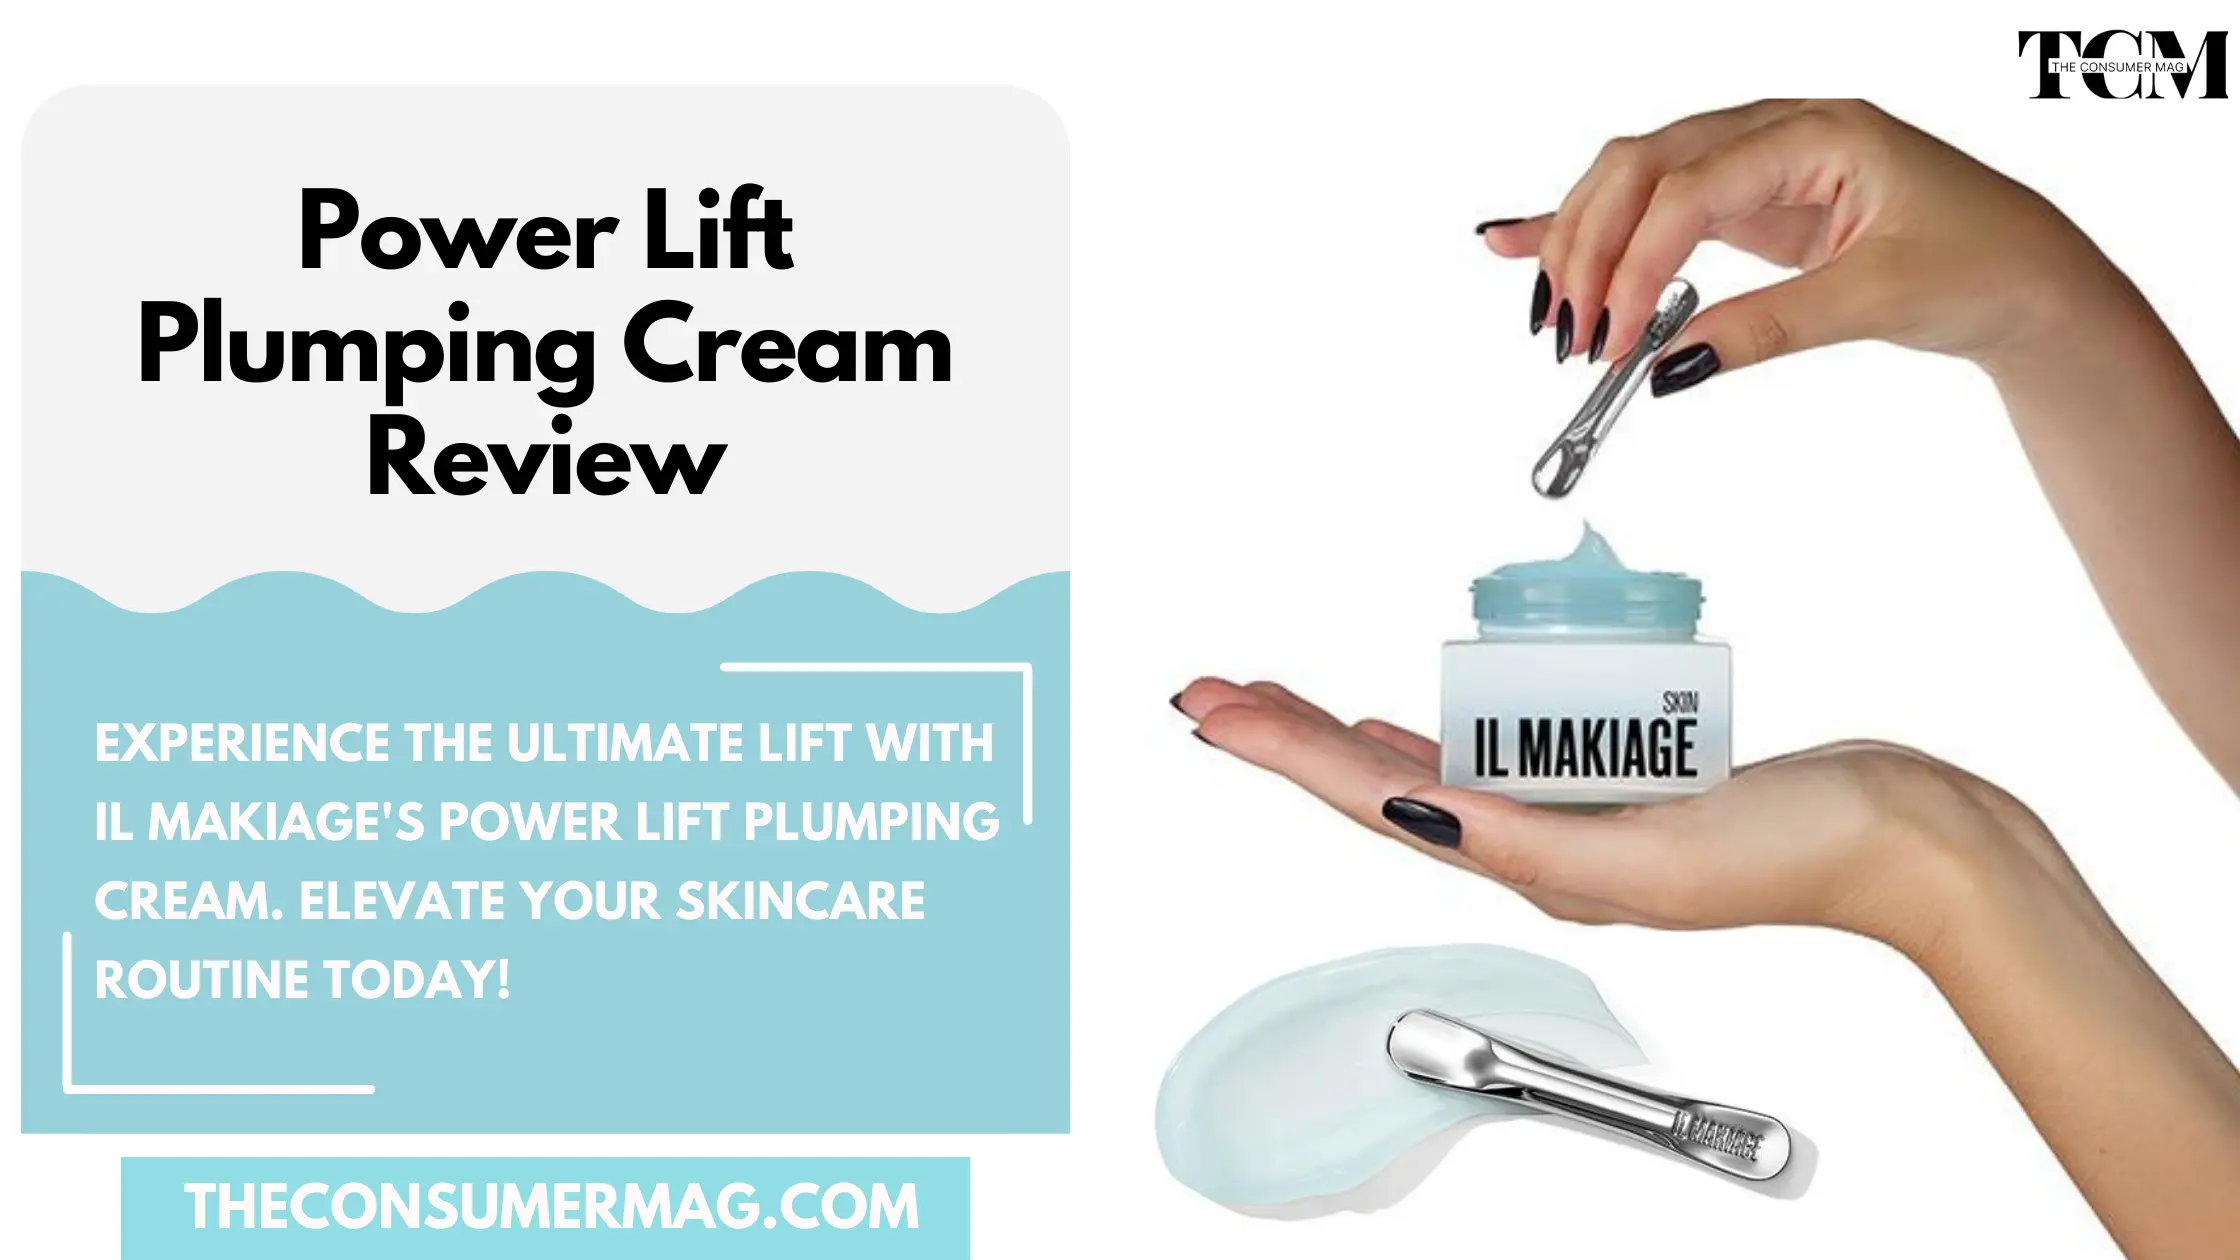 Il Makiage Power Lift Plumping Cream Reviews | Read All